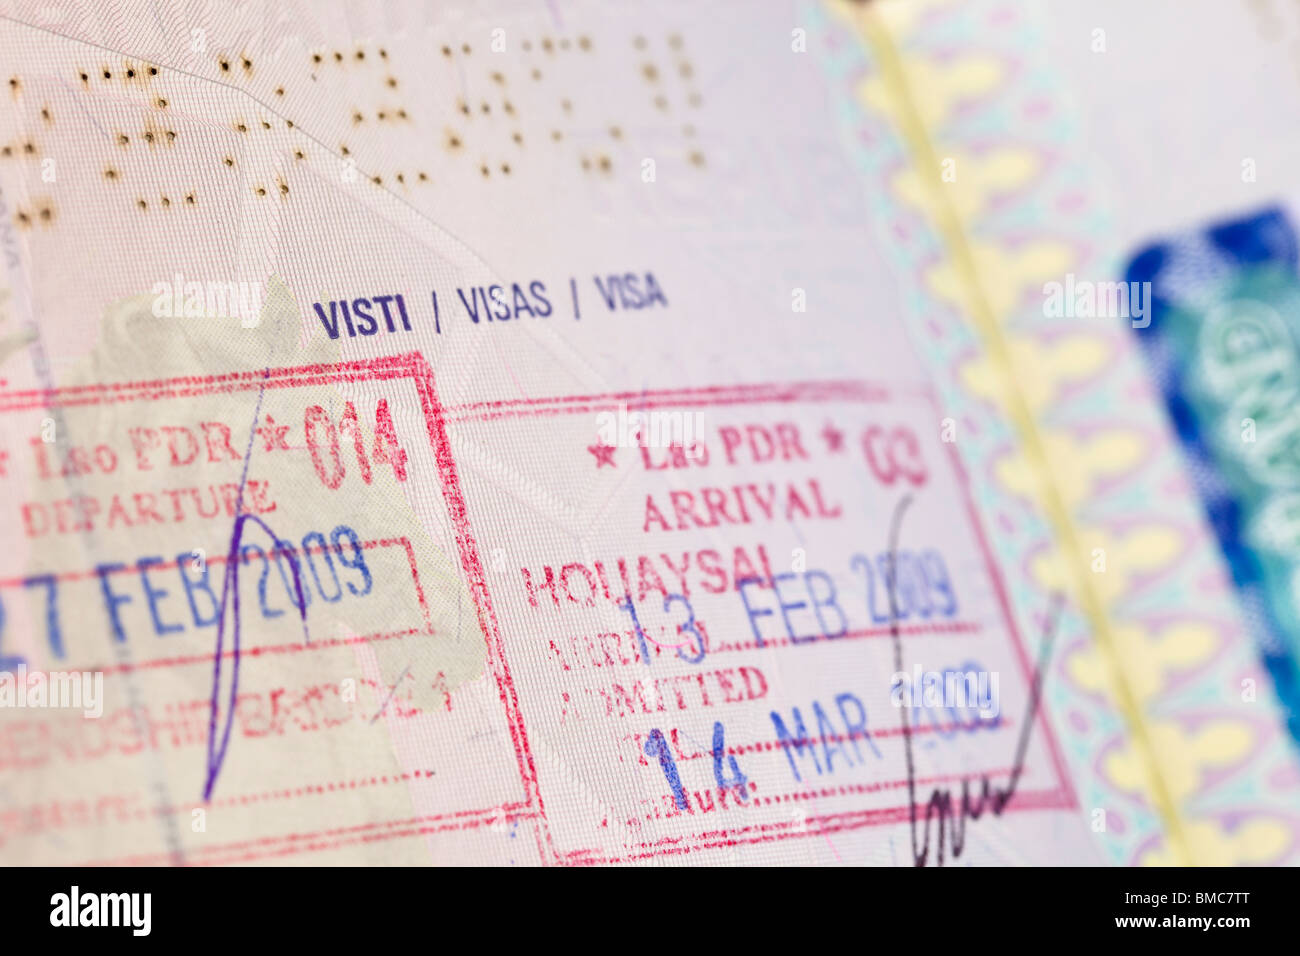 A passport page with visa stamps Stock Photo